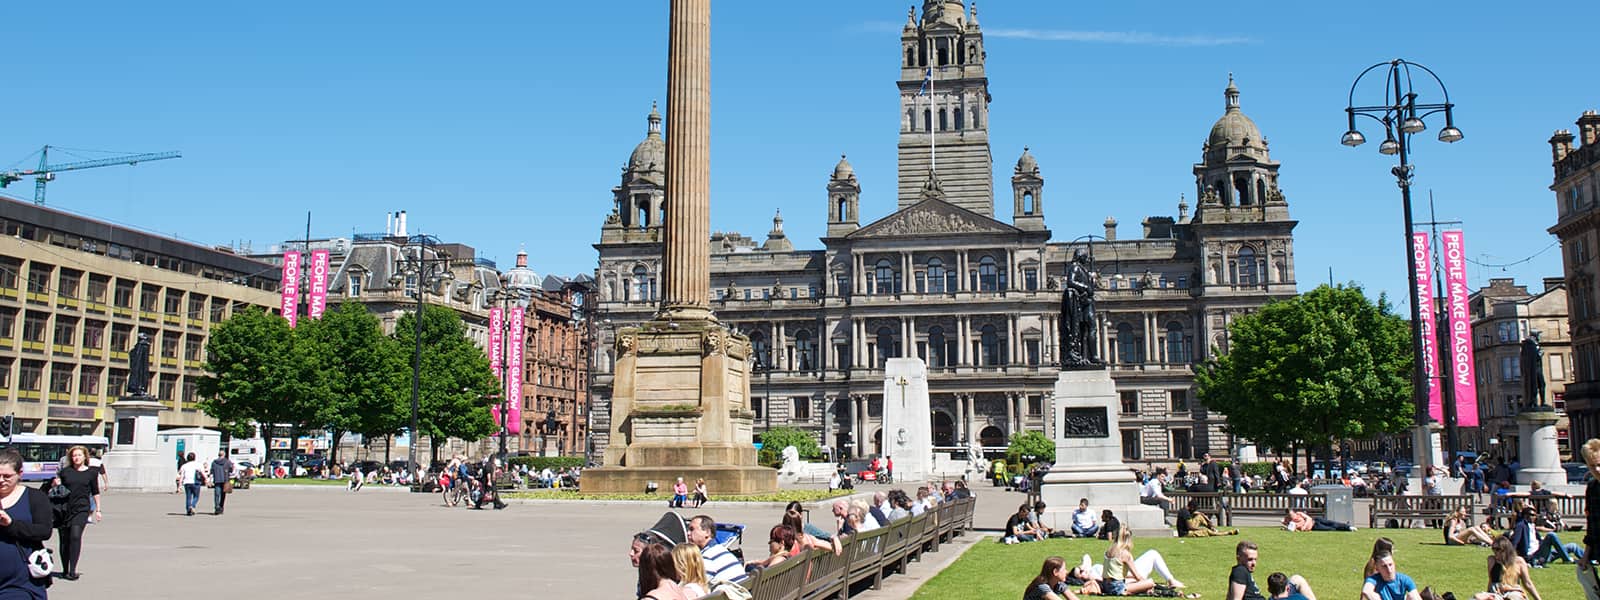 George Square on a sunny day